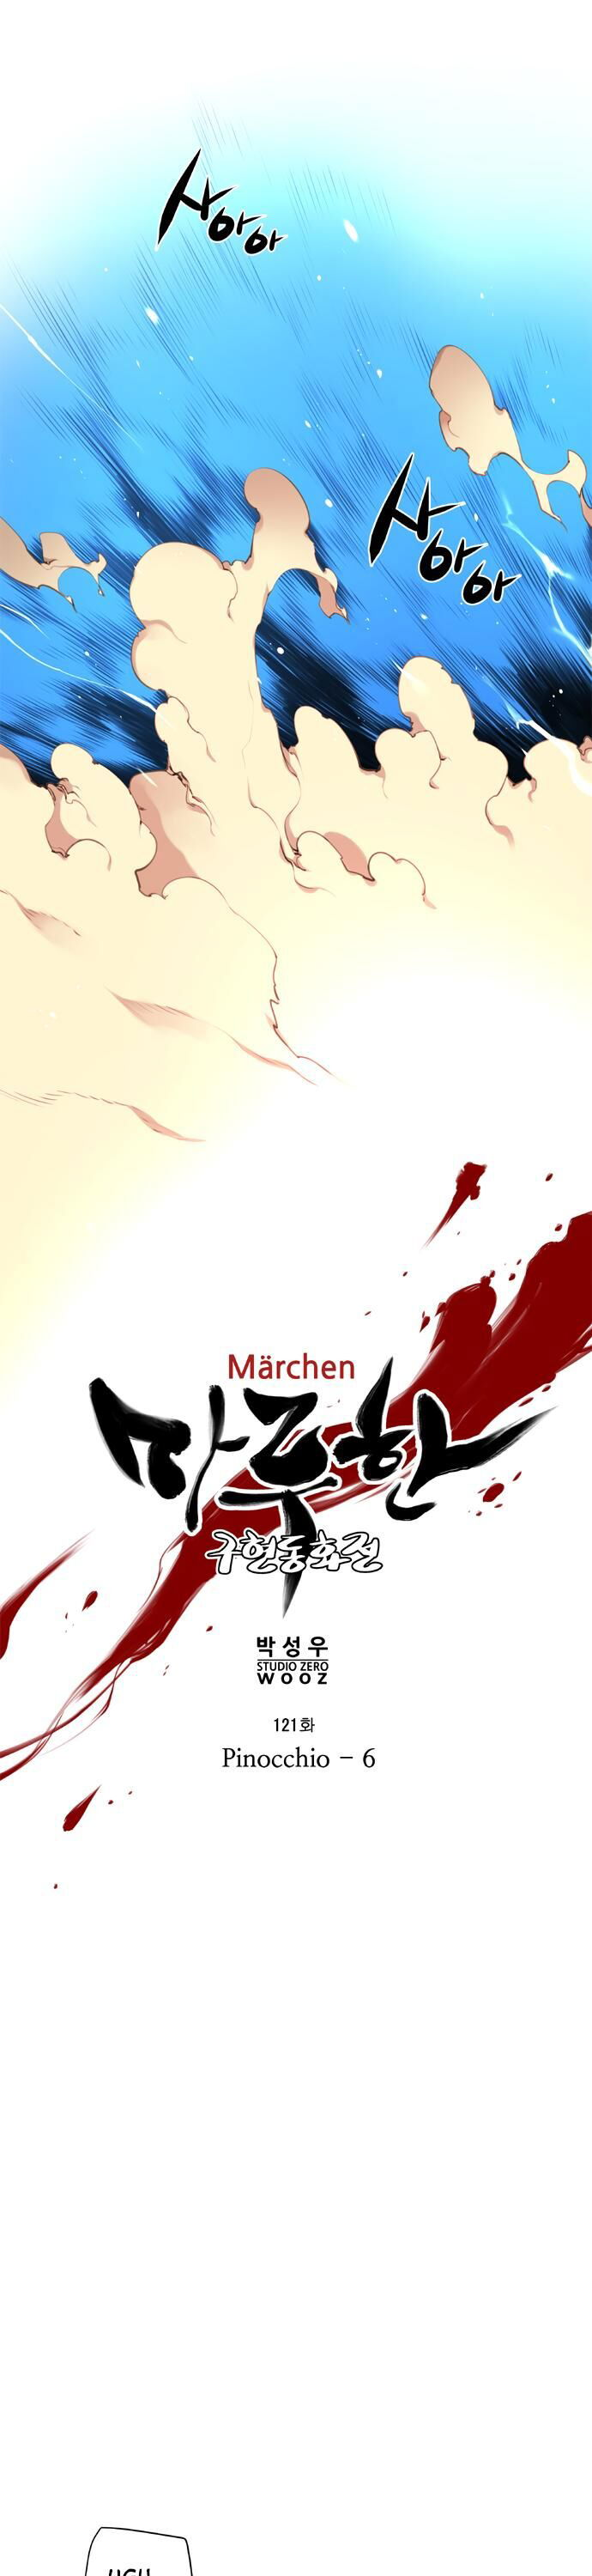 Marchen - The Embodiment of Tales Chapter 121 page 5